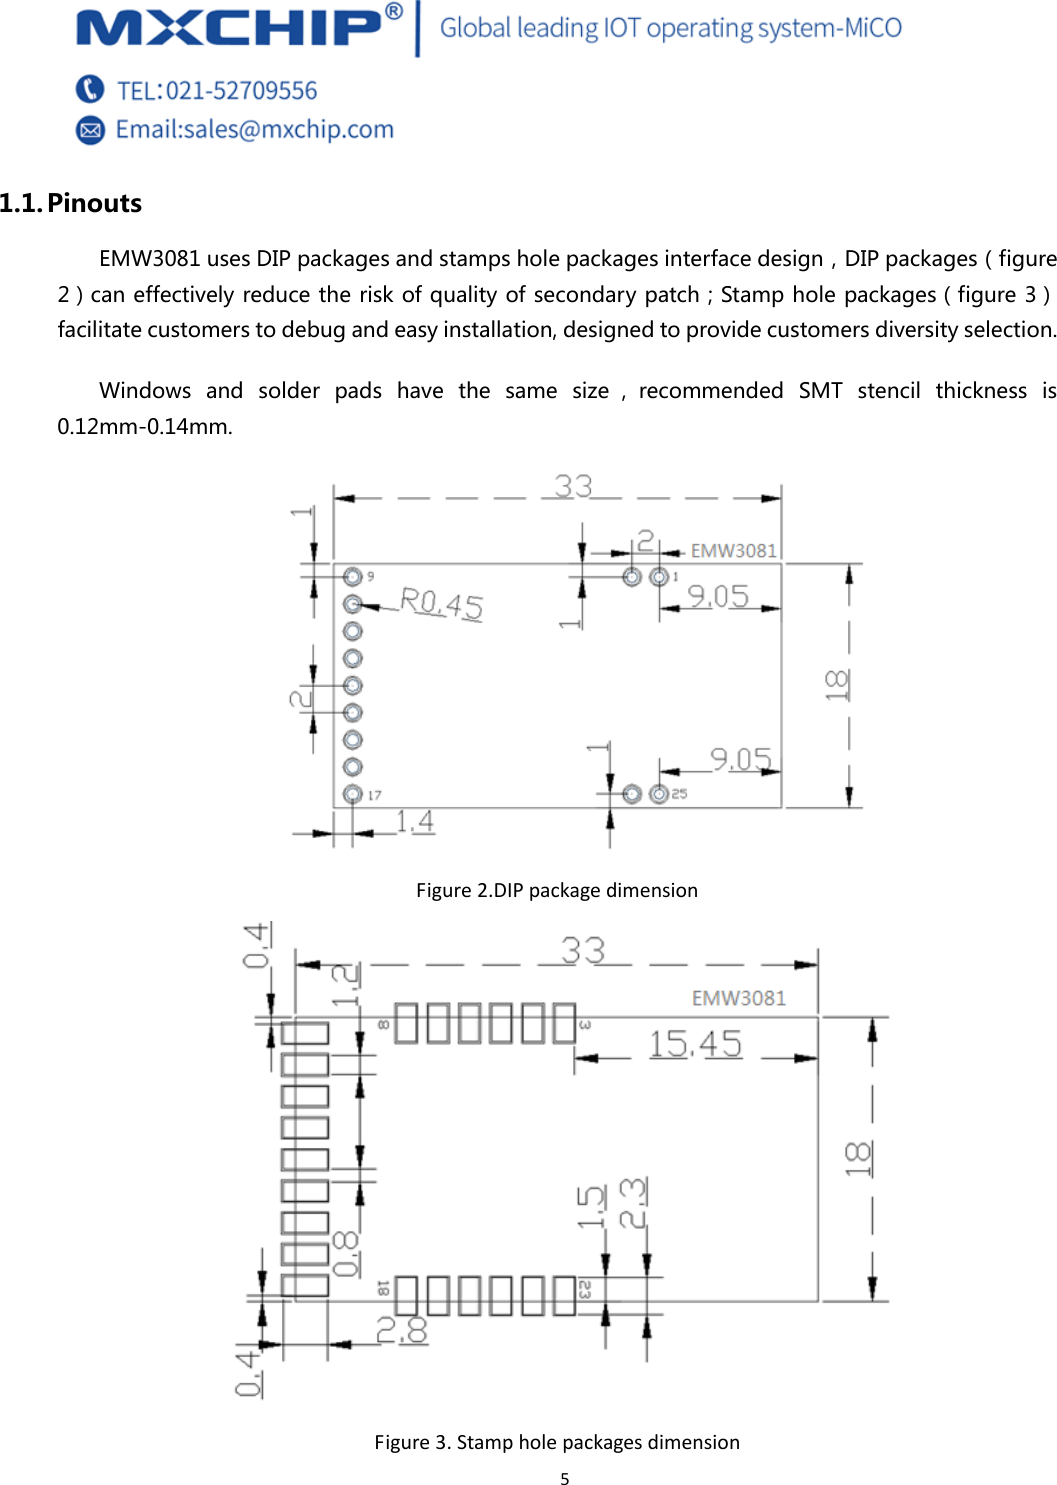  5 1.1. Pinouts EMW3081 uses DIP packages and stamps hole packages interface design，DIP packages（figure 2）can effectively reduce the risk of quality of secondary patch；Stamp hole packages（figure 3） facilitate customers to debug and easy installation, designed to provide customers diversity selection. Windows  and  solder  pads  have  the same size，recommended SMT stencil  thickness  is 0.12mm-0.14mm.  Figure2.DIPpackagedimensionFigure3.Stampholepackagesdimension